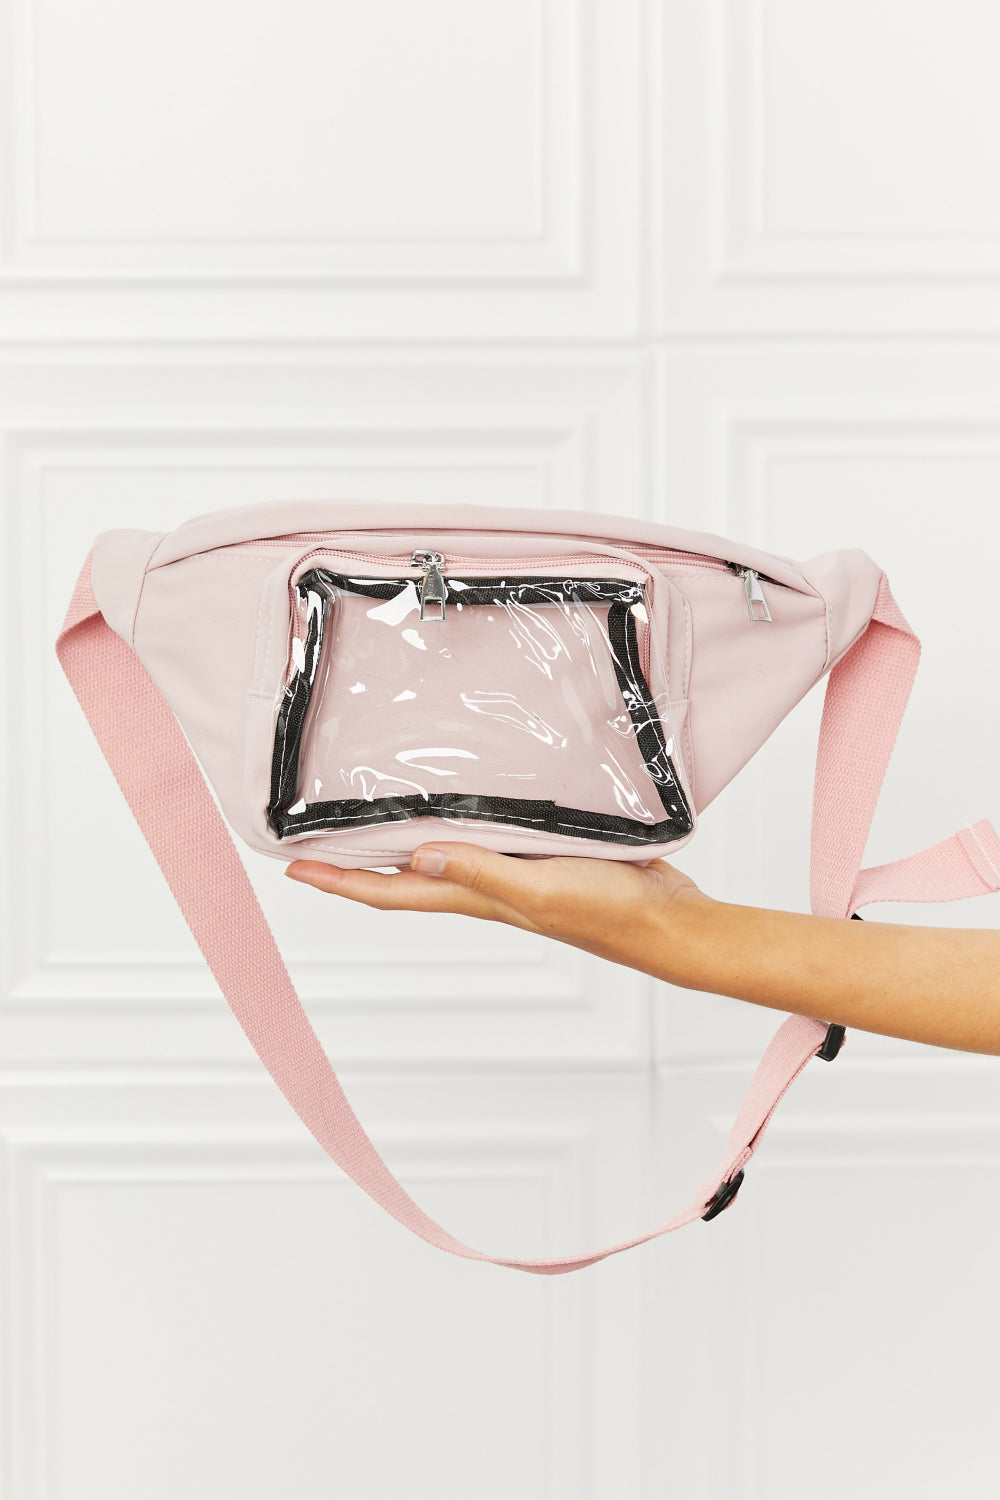 Fame Doing Me Waist Bag in Pink - The Fashion Unicorn